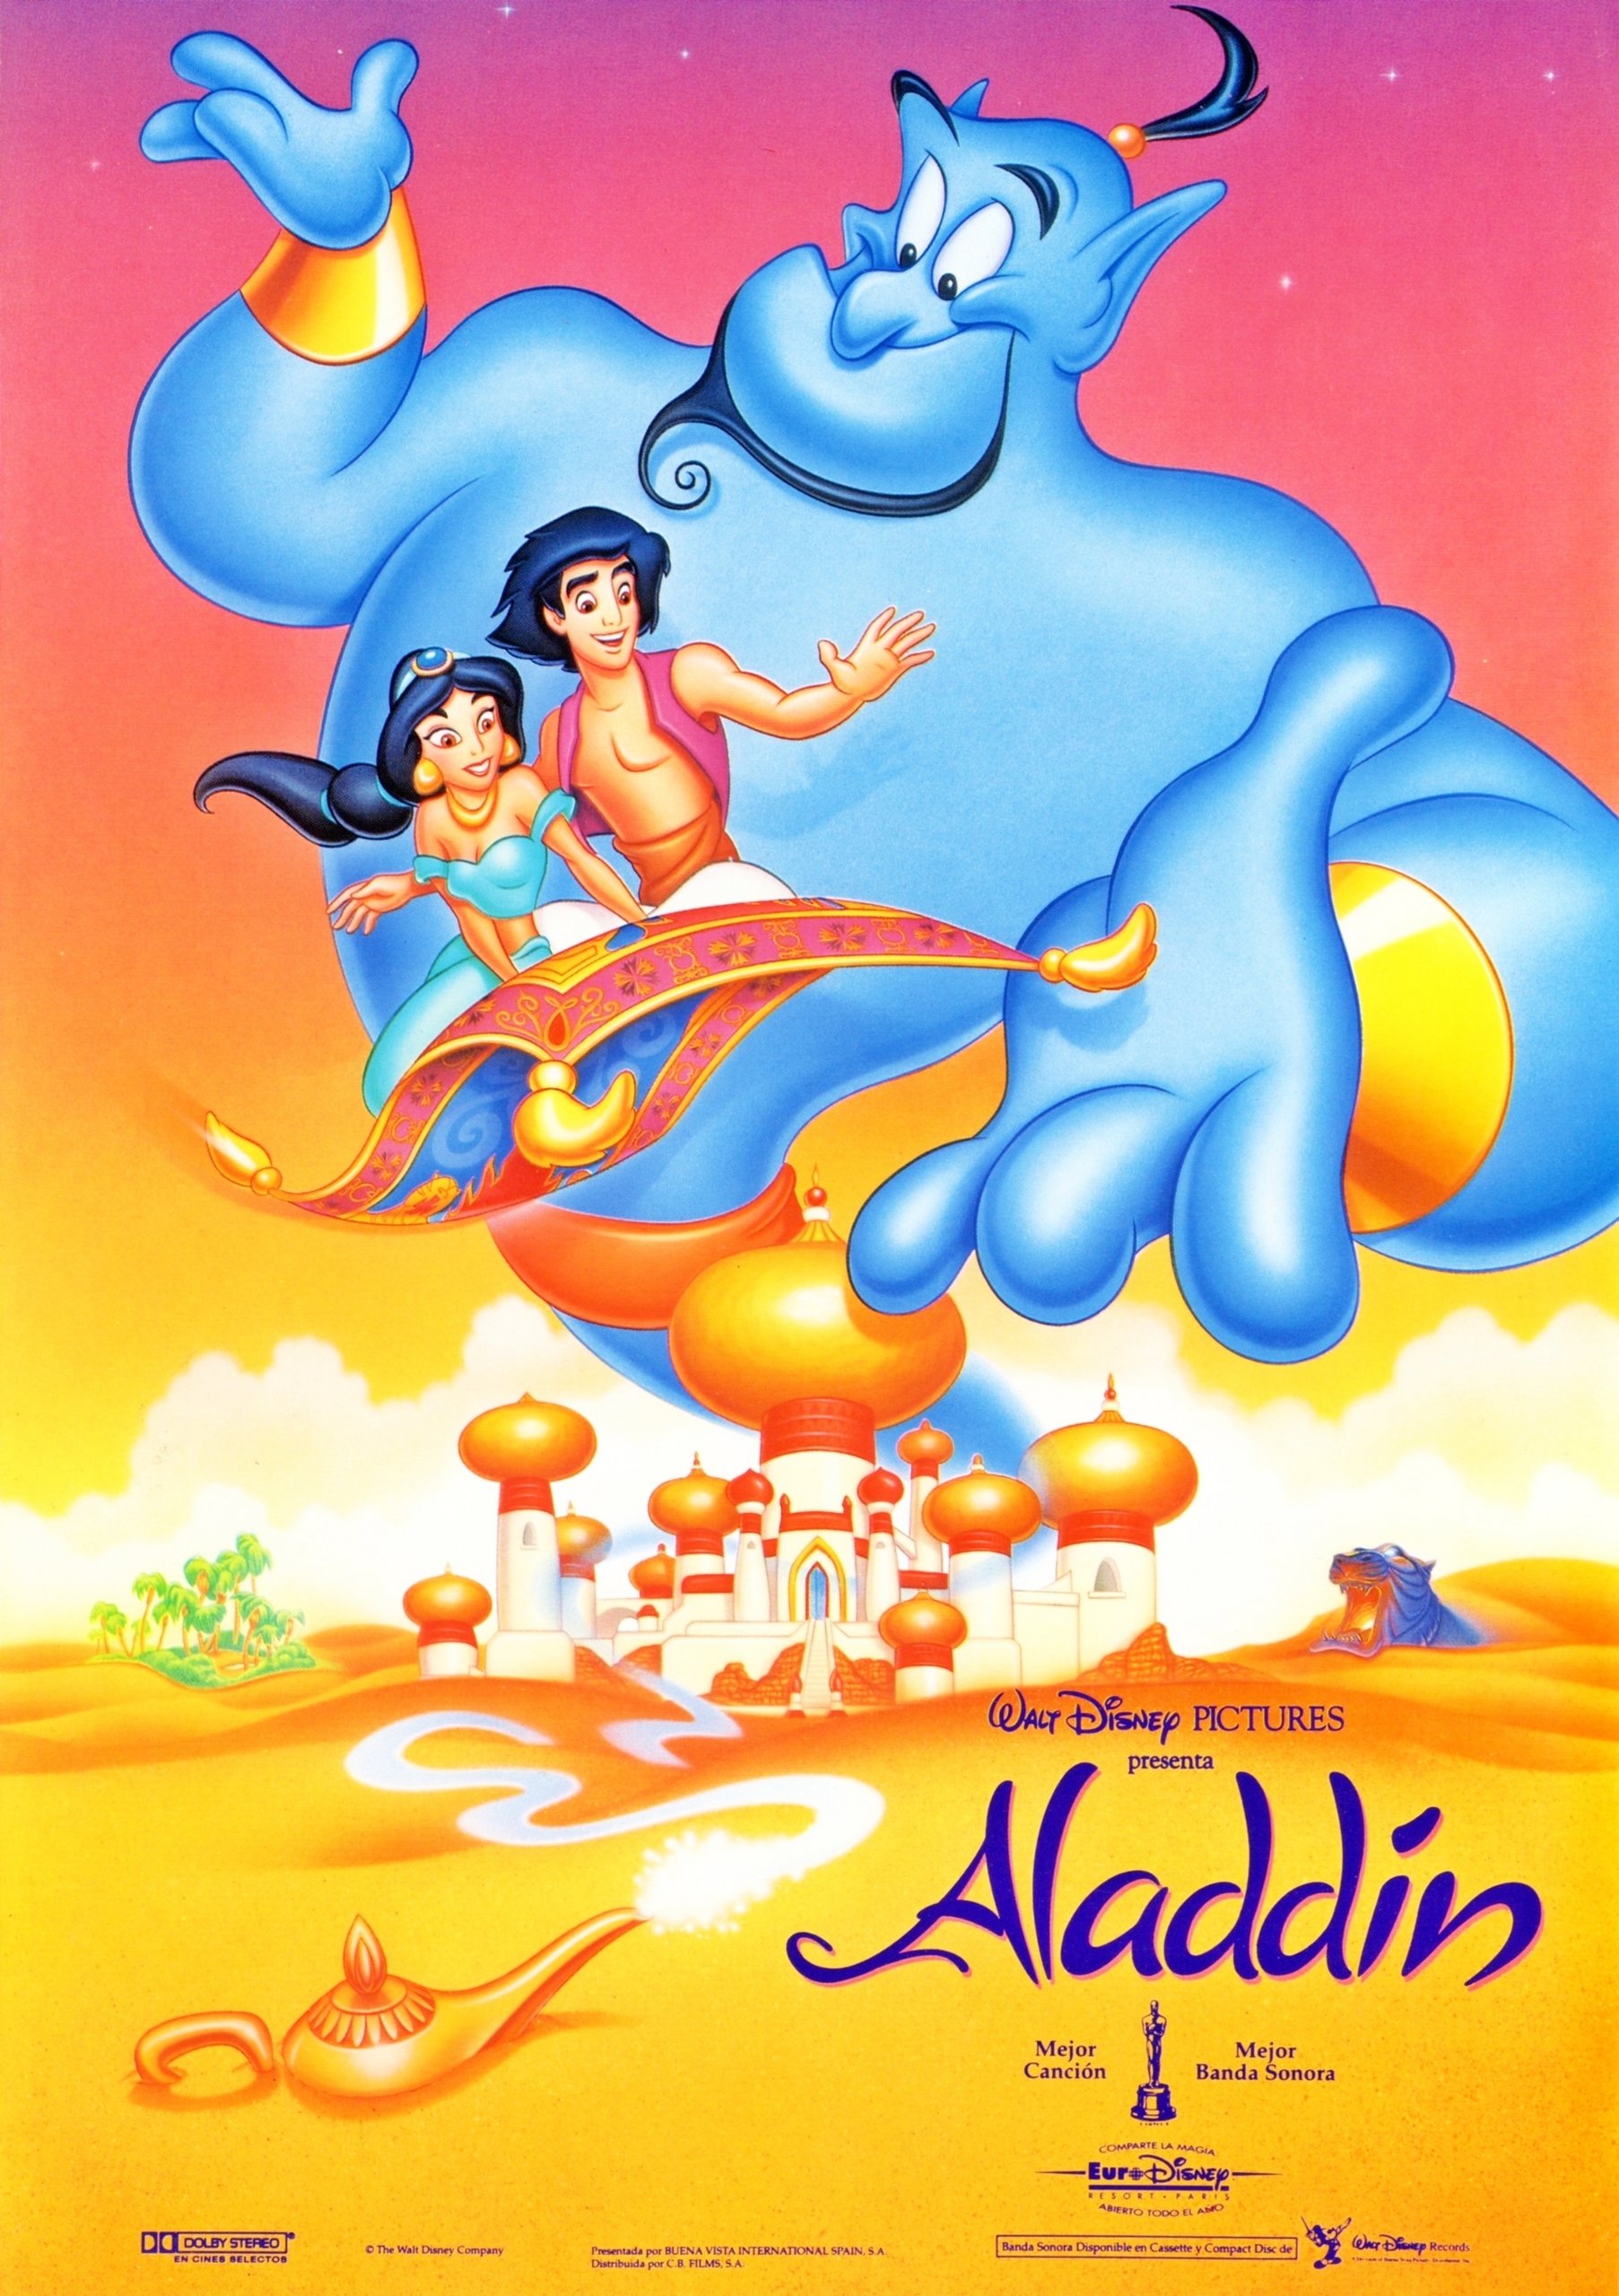 Movie Poster Wallpaper - Aladdin Disney Pictures Movie , HD Wallpaper & Backgrounds